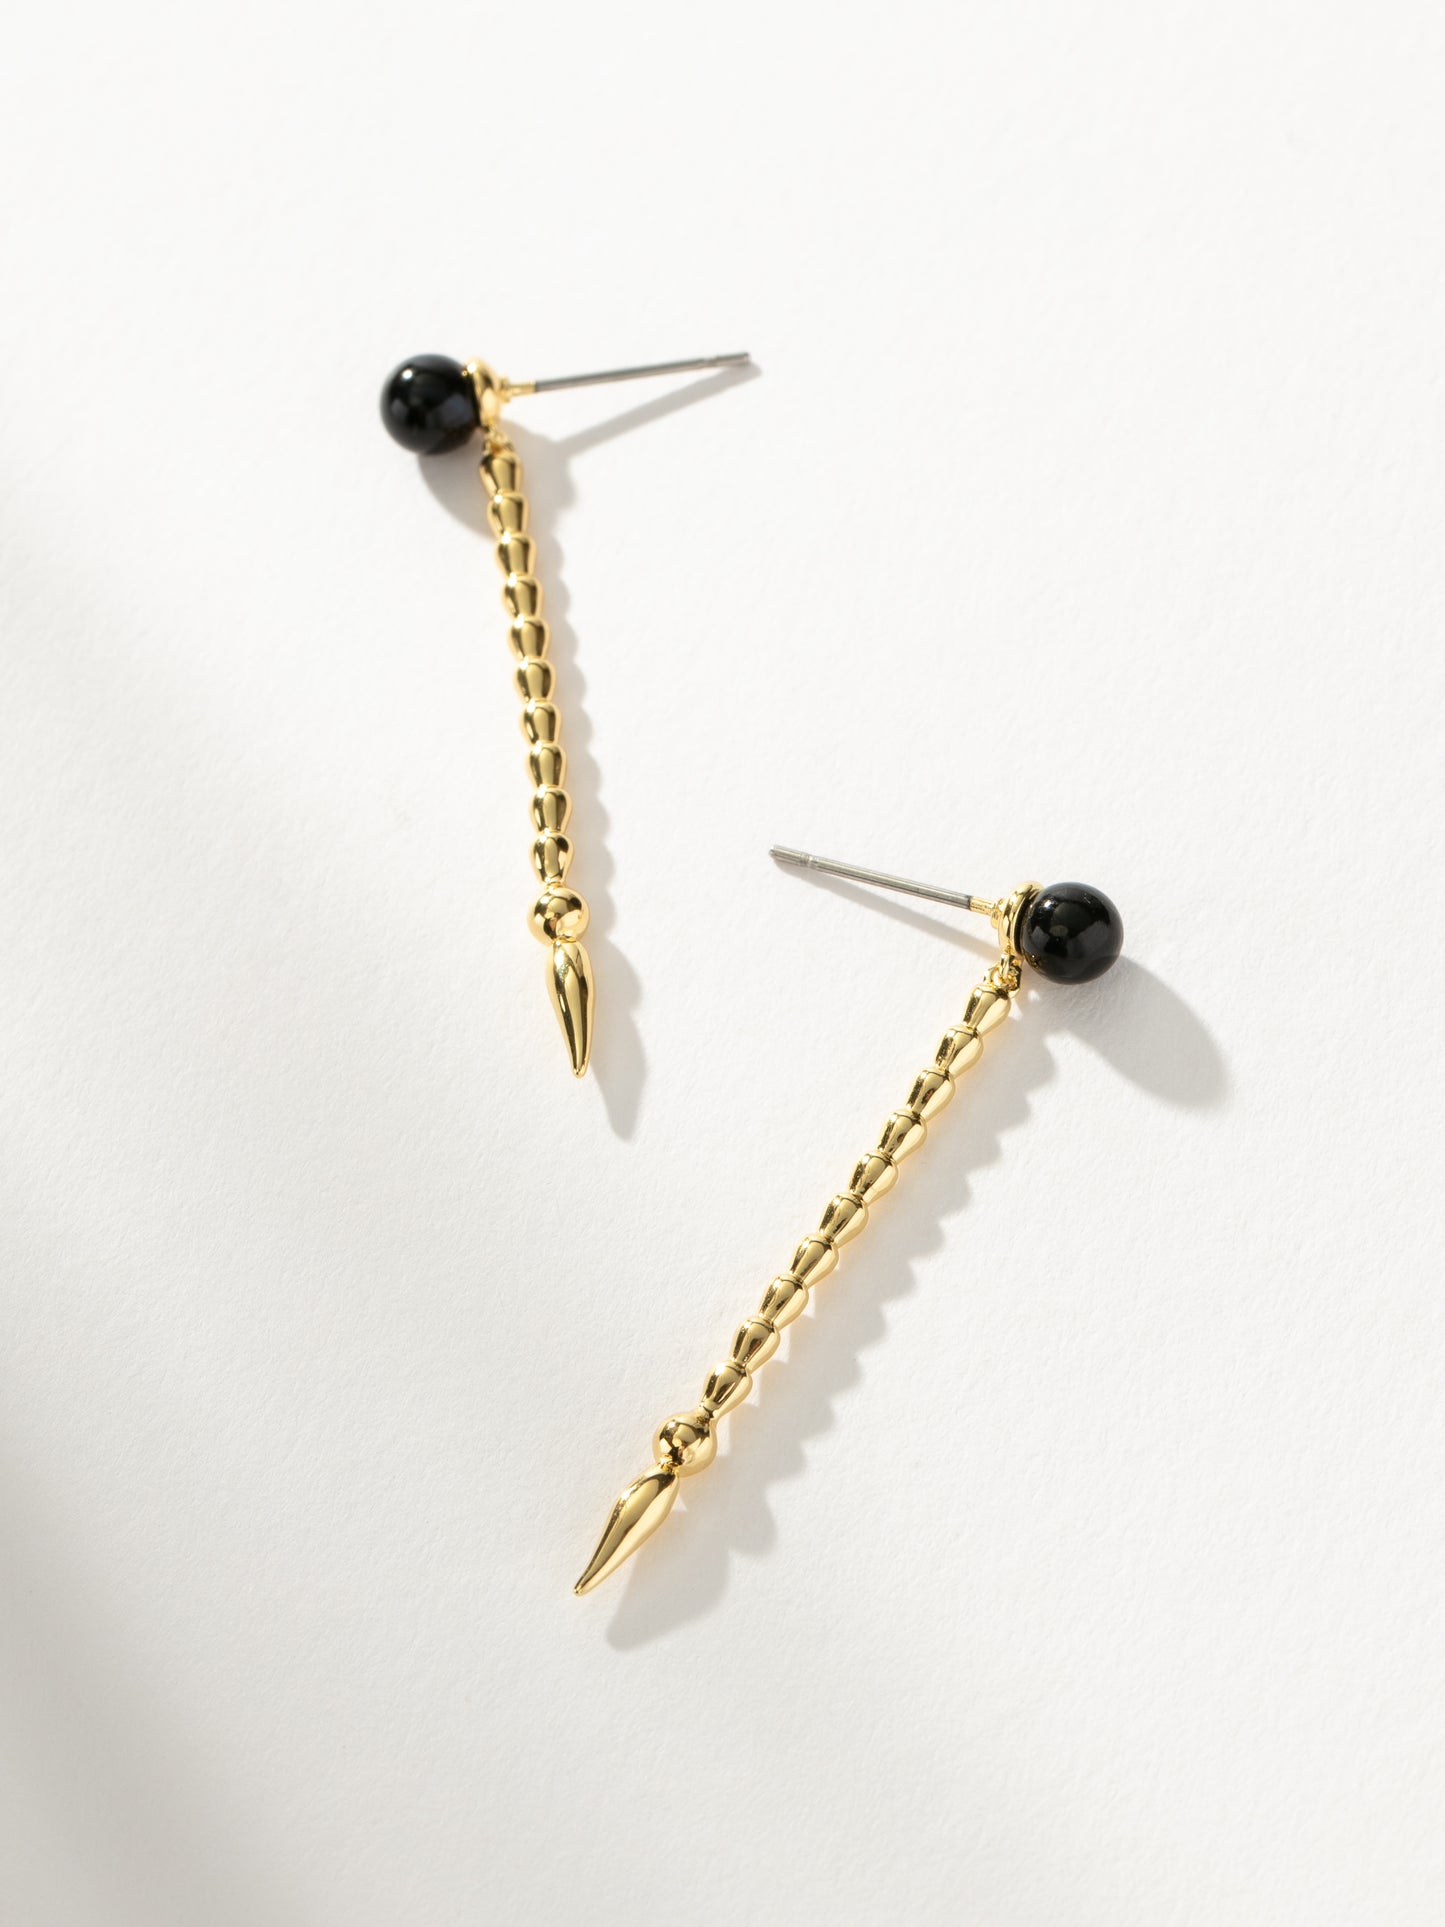 Down to It Earrings | Gold | Product Image | Uncommon James